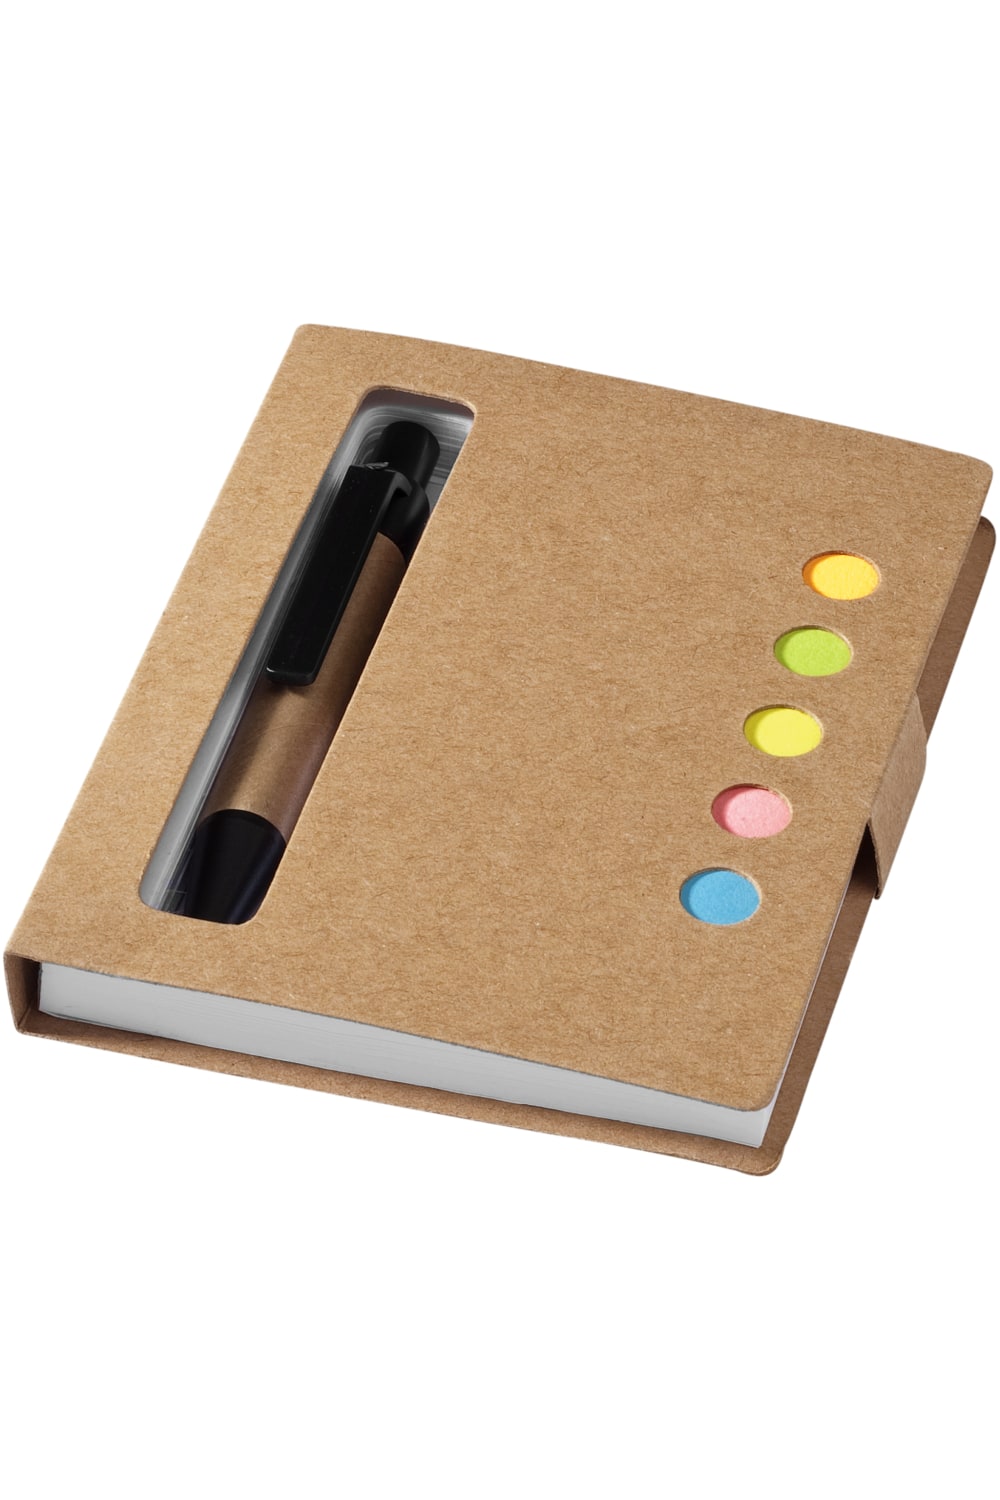 Bullet Reveal Sticky Notes Book And Pen (Natural) (4.1 x 3.1 x 0.4 inches)